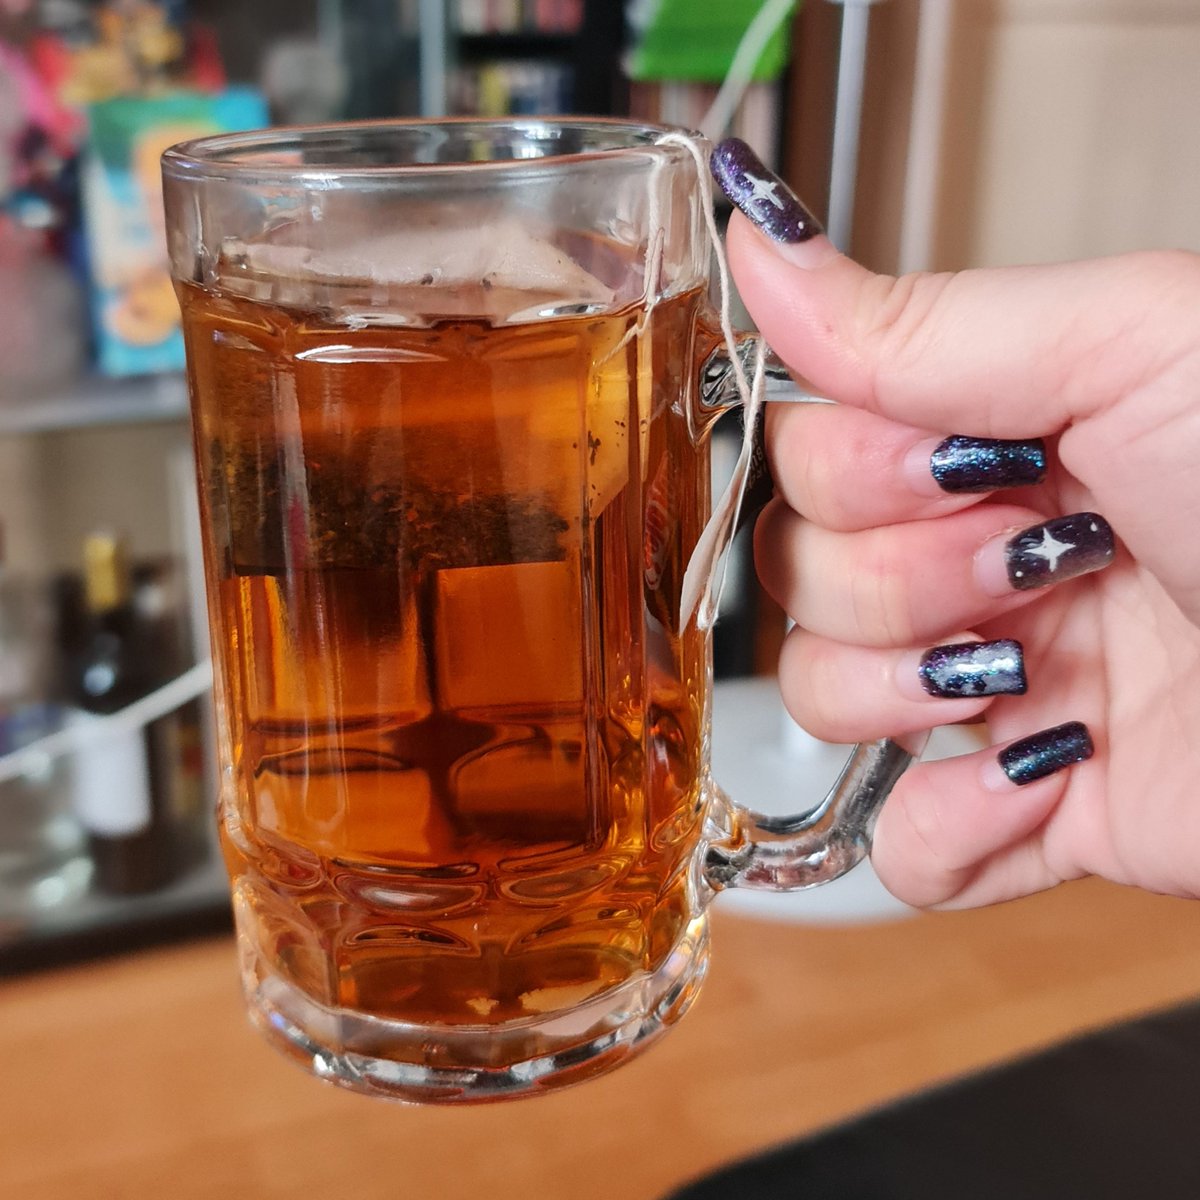 Any tea drinkers out there? Be it English or Chinese tea, do you agree the same type of tea can taste different if the temperature is different or the type of cup/mug used? What are your thoughts or experiences? #tea #teadrinkers